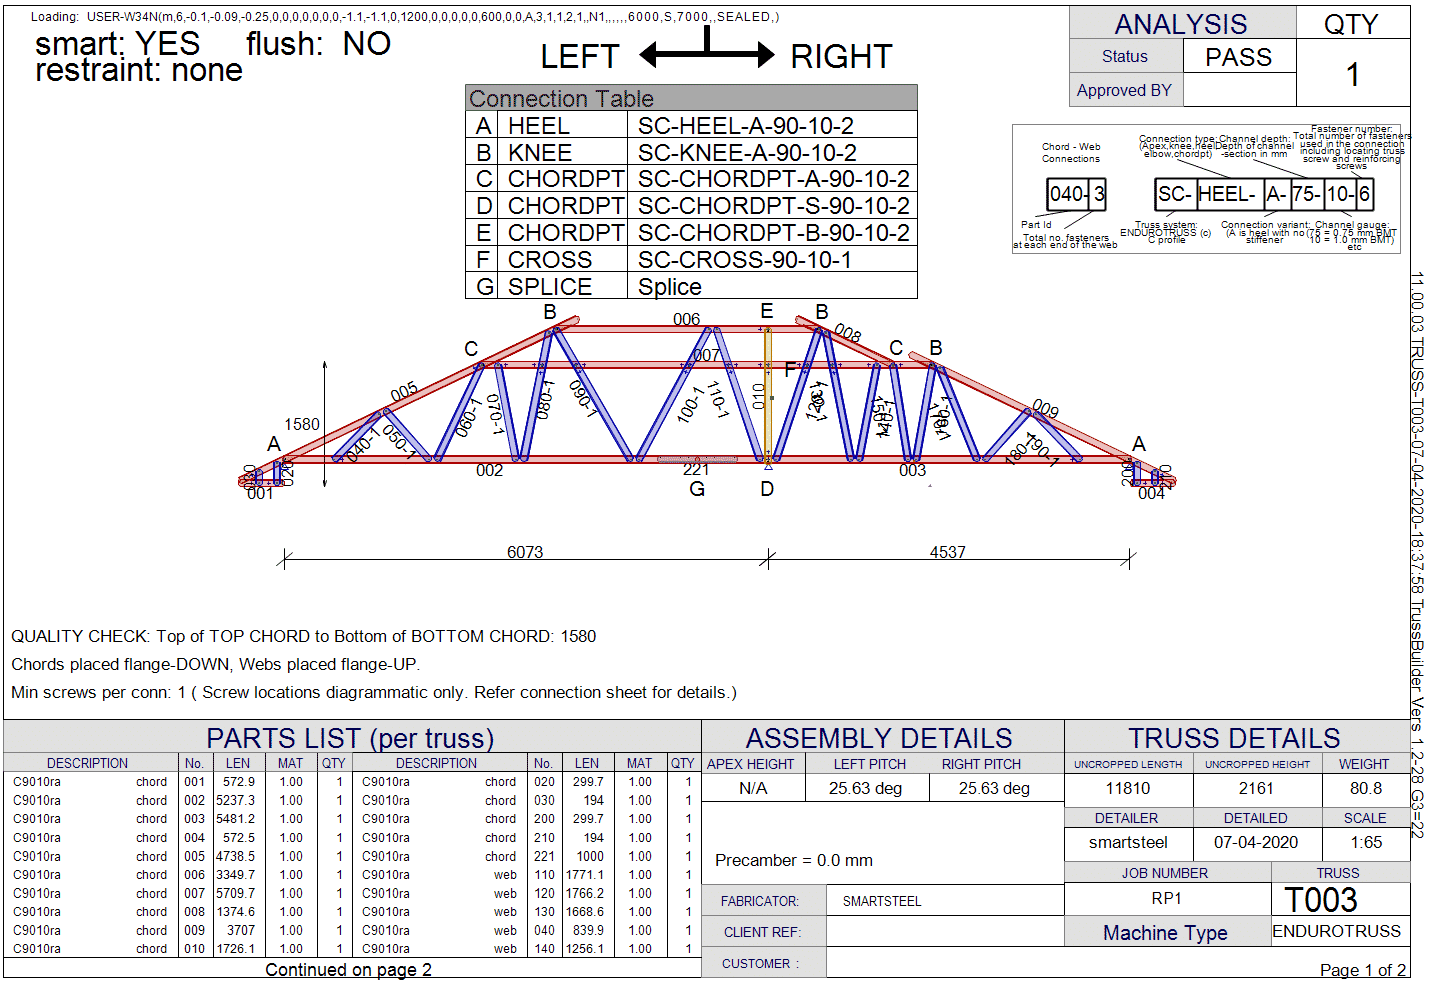 Truss with multiple